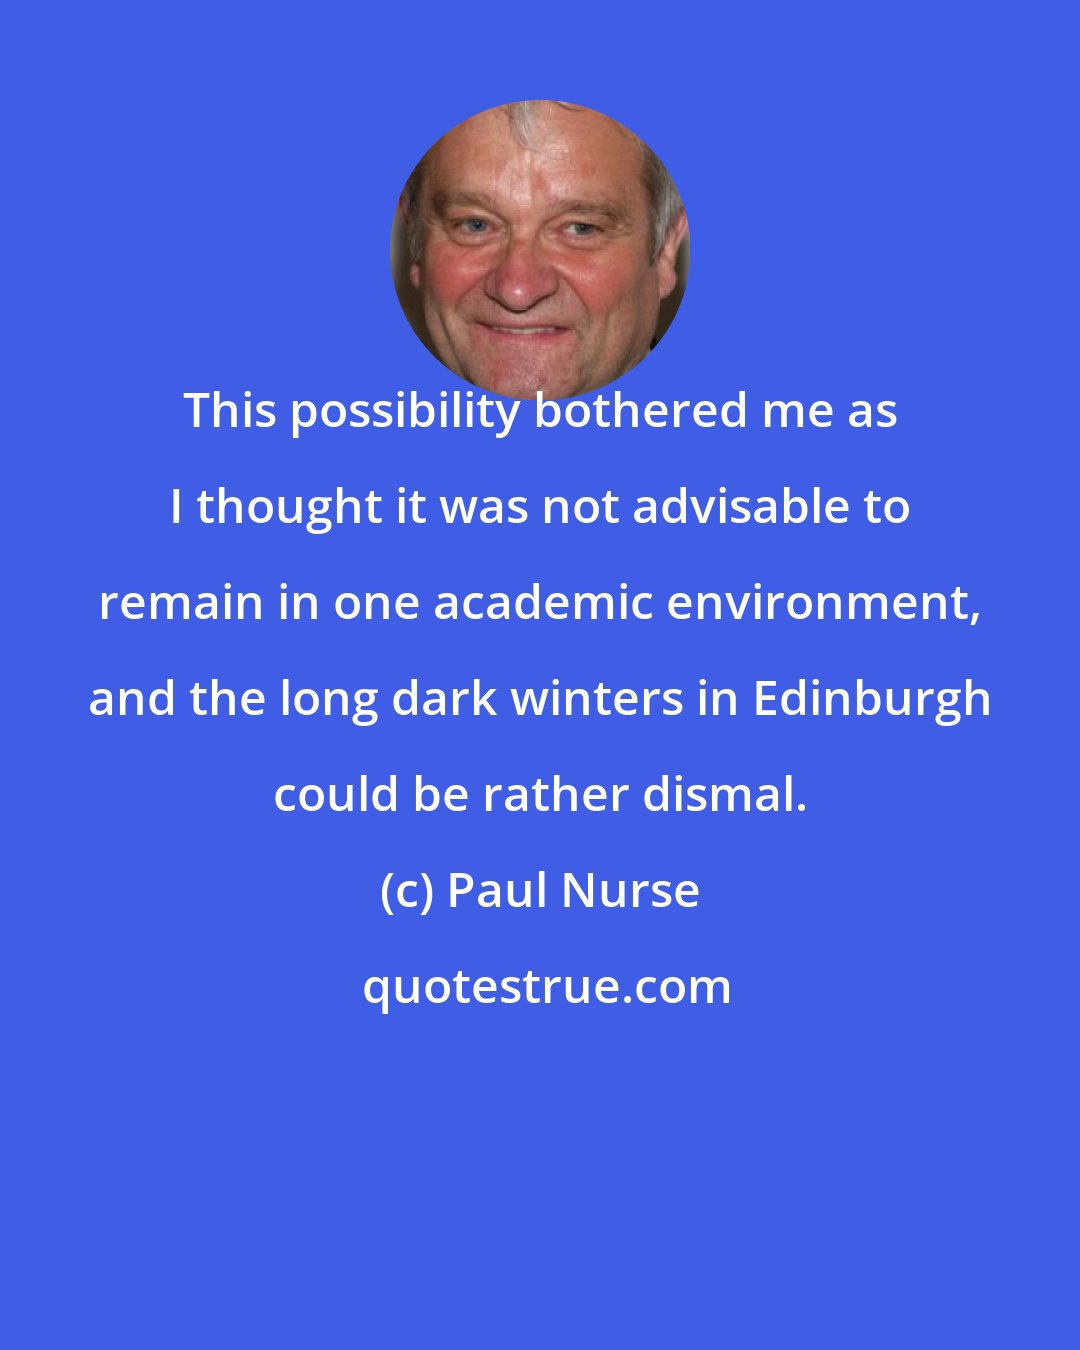 Paul Nurse: This possibility bothered me as I thought it was not advisable to remain in one academic environment, and the long dark winters in Edinburgh could be rather dismal.